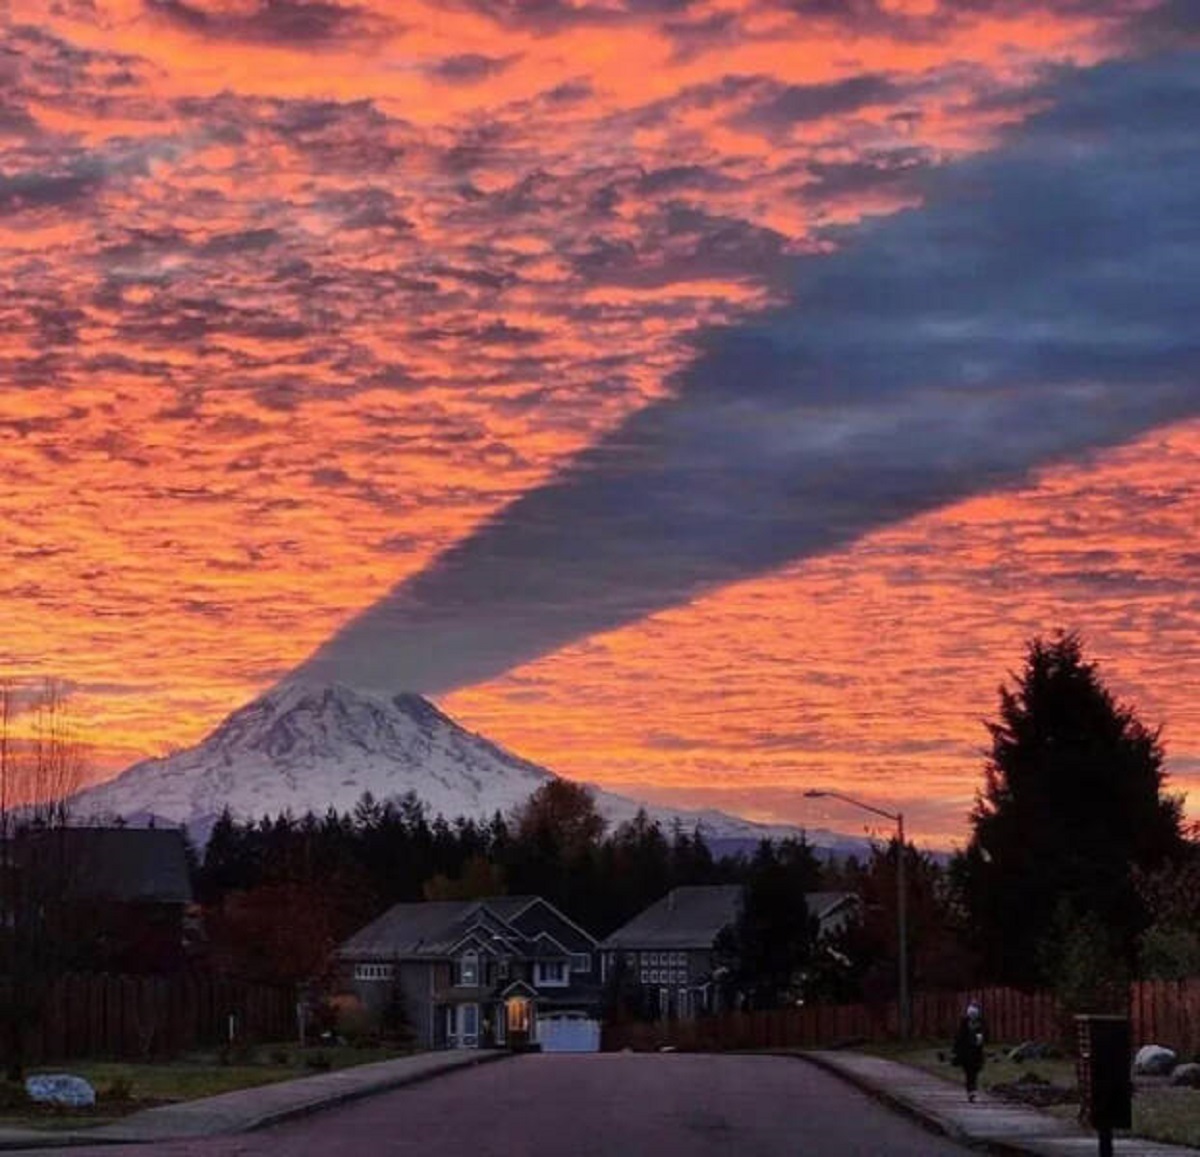 "The shadow of Mount Rainier causes a gap in the sunset."